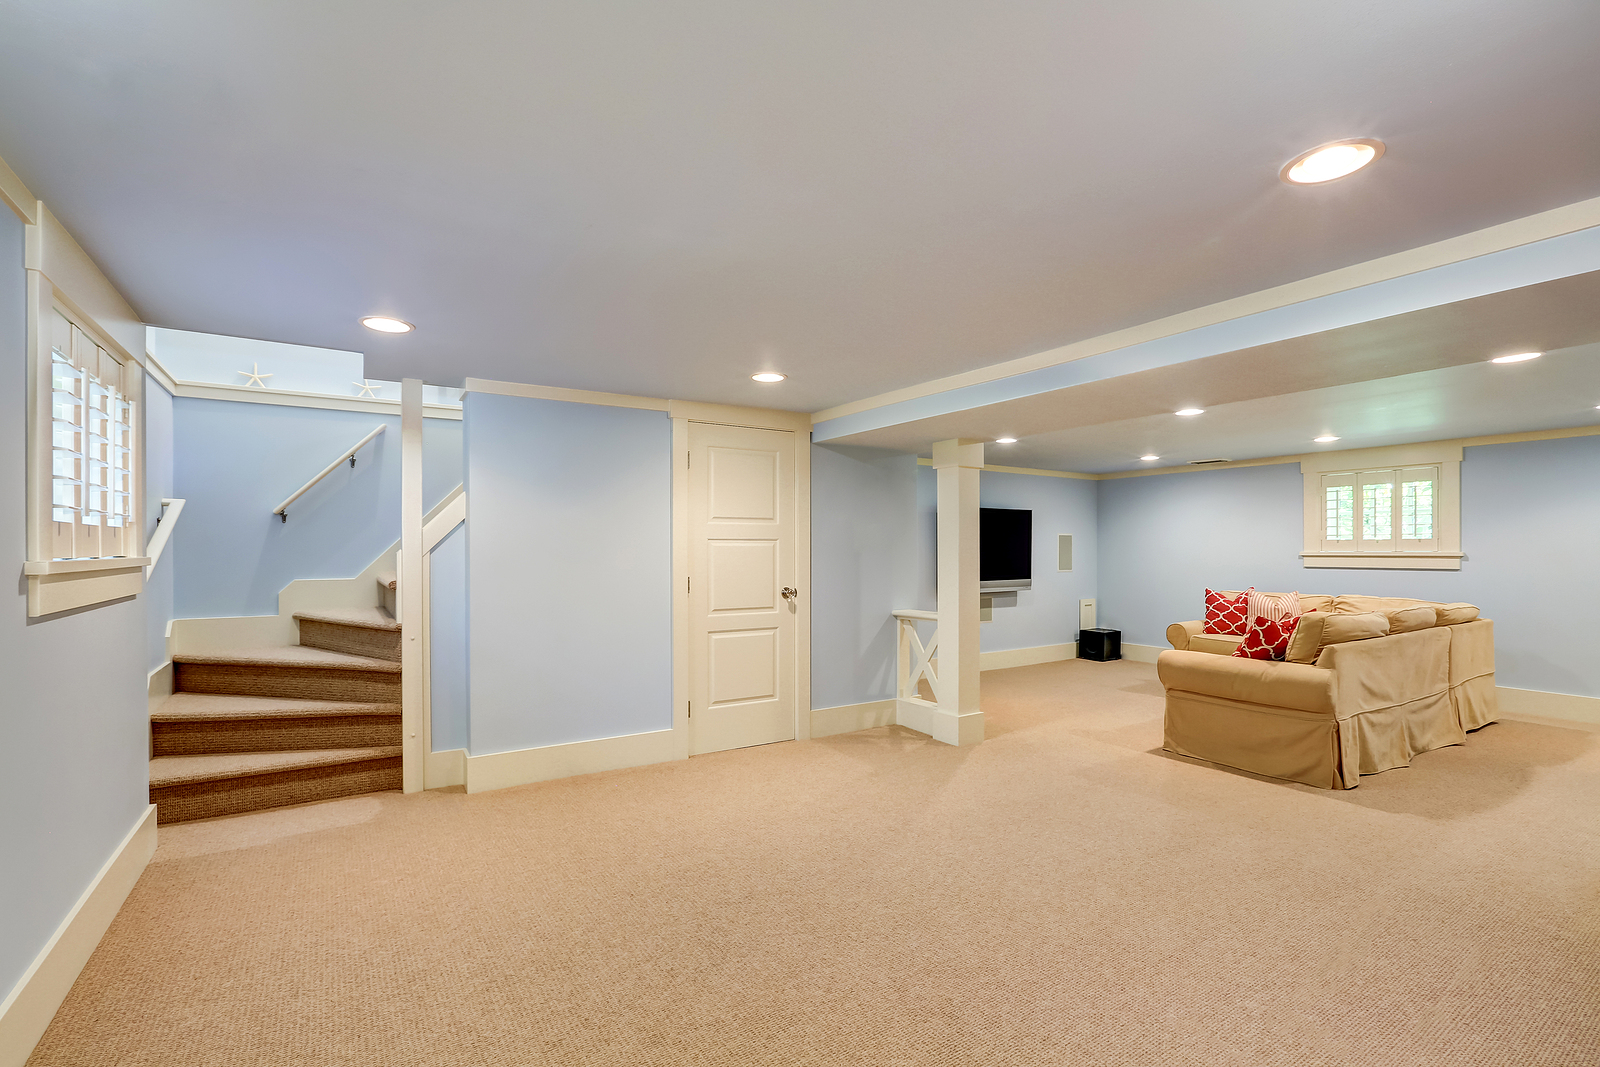 Basement Finishes in Sussex NJ & Beyond